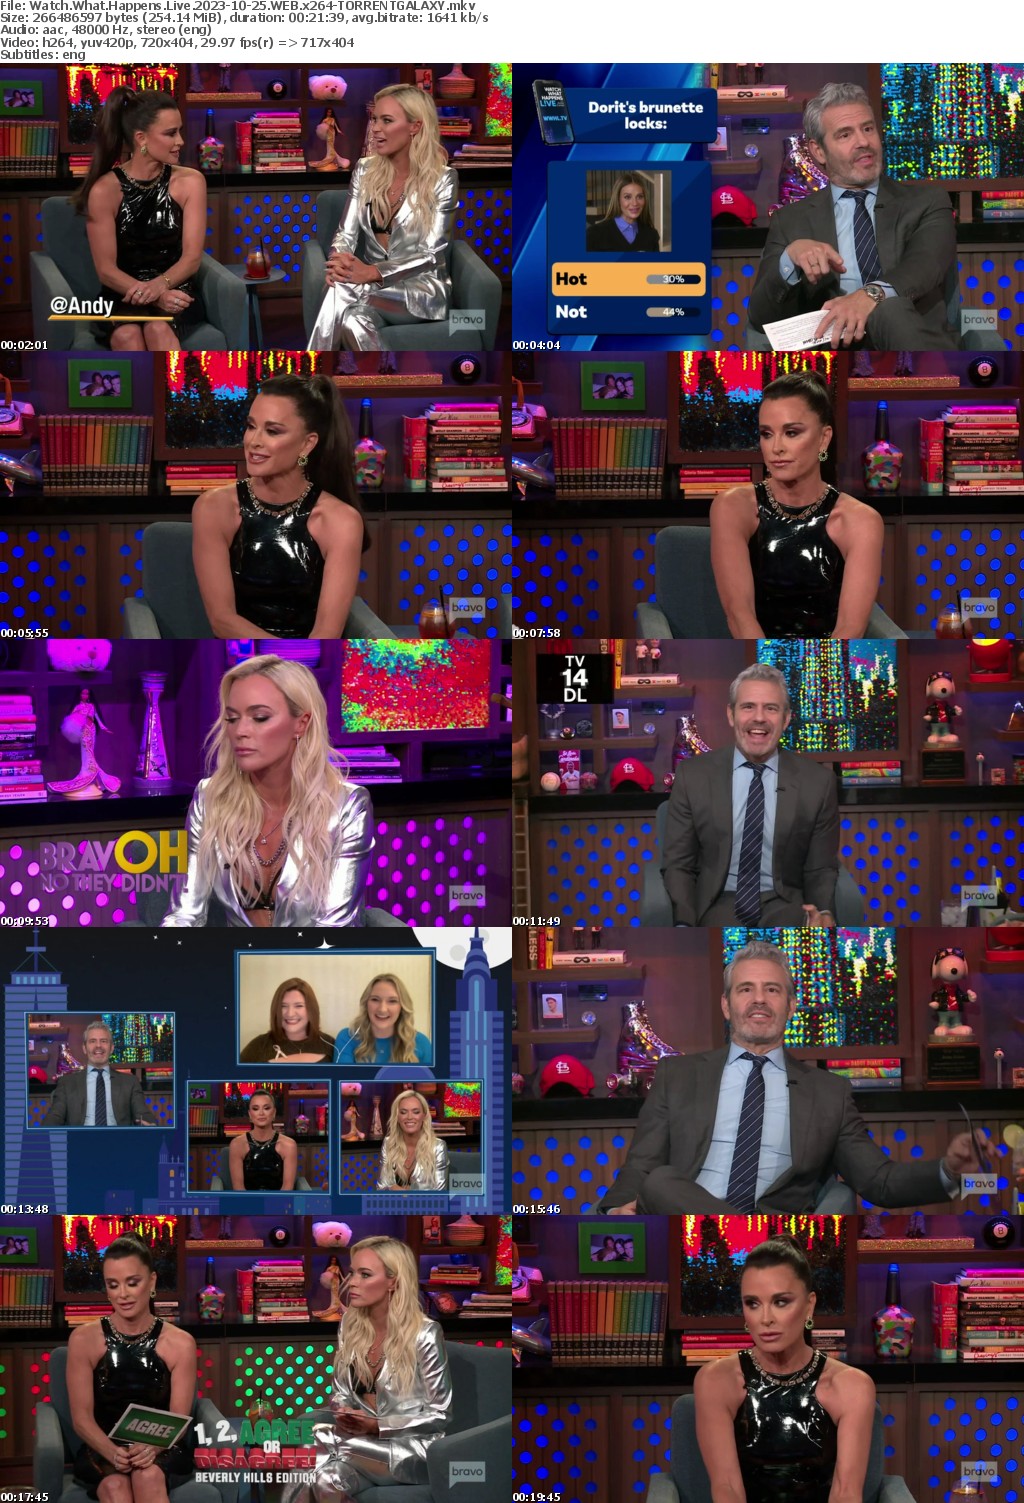 Watch What Happens Live 2023-10-25 WEB x264-GALAXY